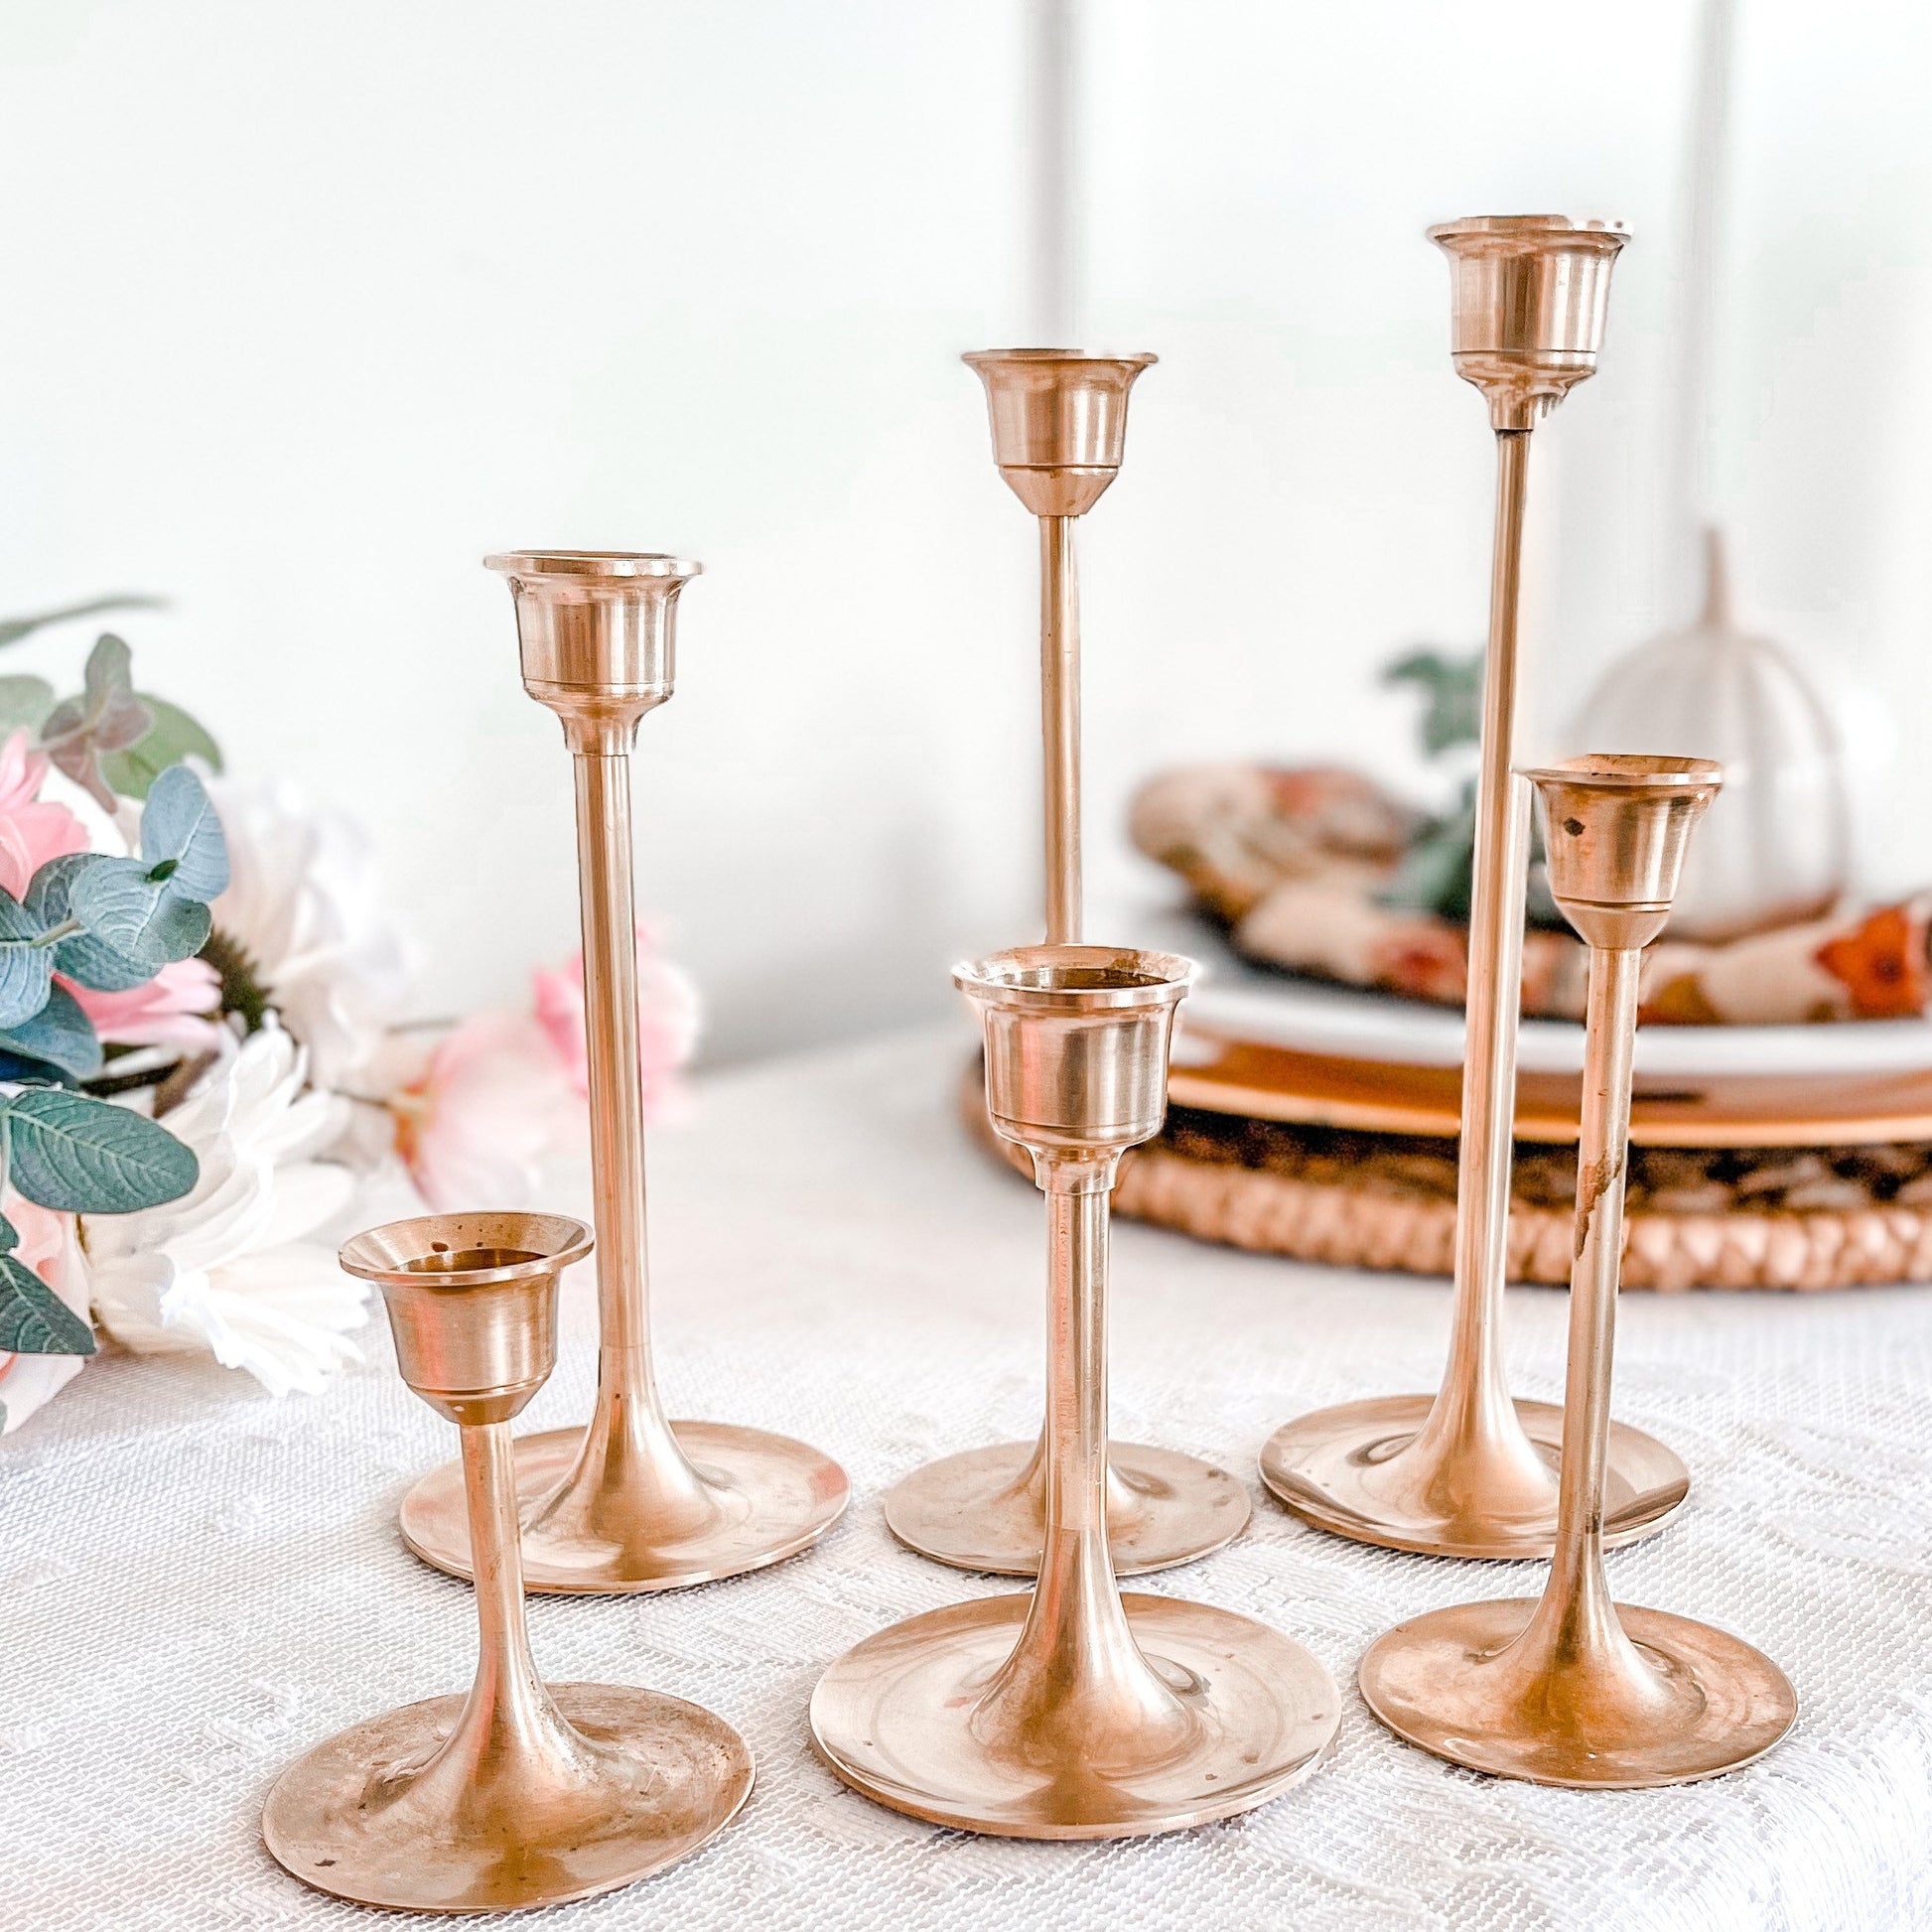 Vintage, Candle Holder, Brass Candlestick, Fall Table Decor